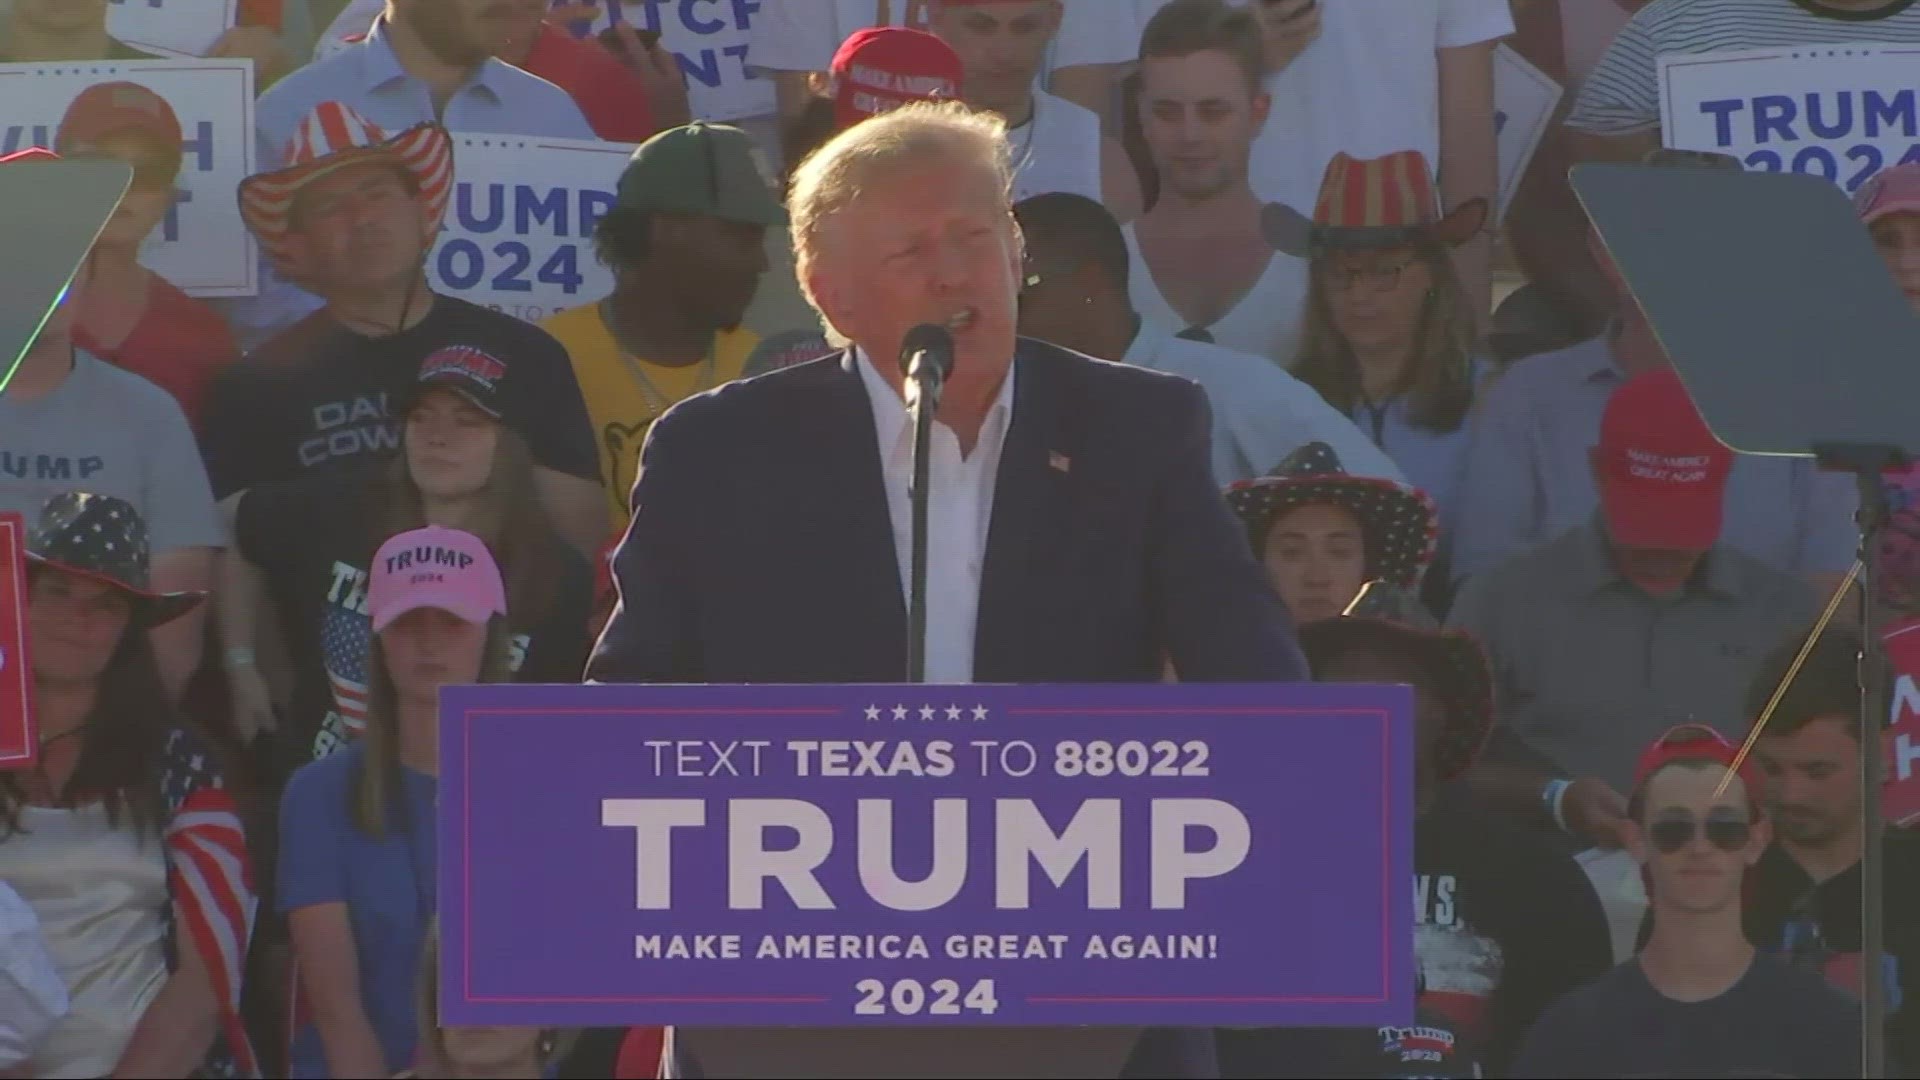 Facing a potential indictment, former President Donald Trump took a defiant stance at a rally Saturday in Waco, Texas.